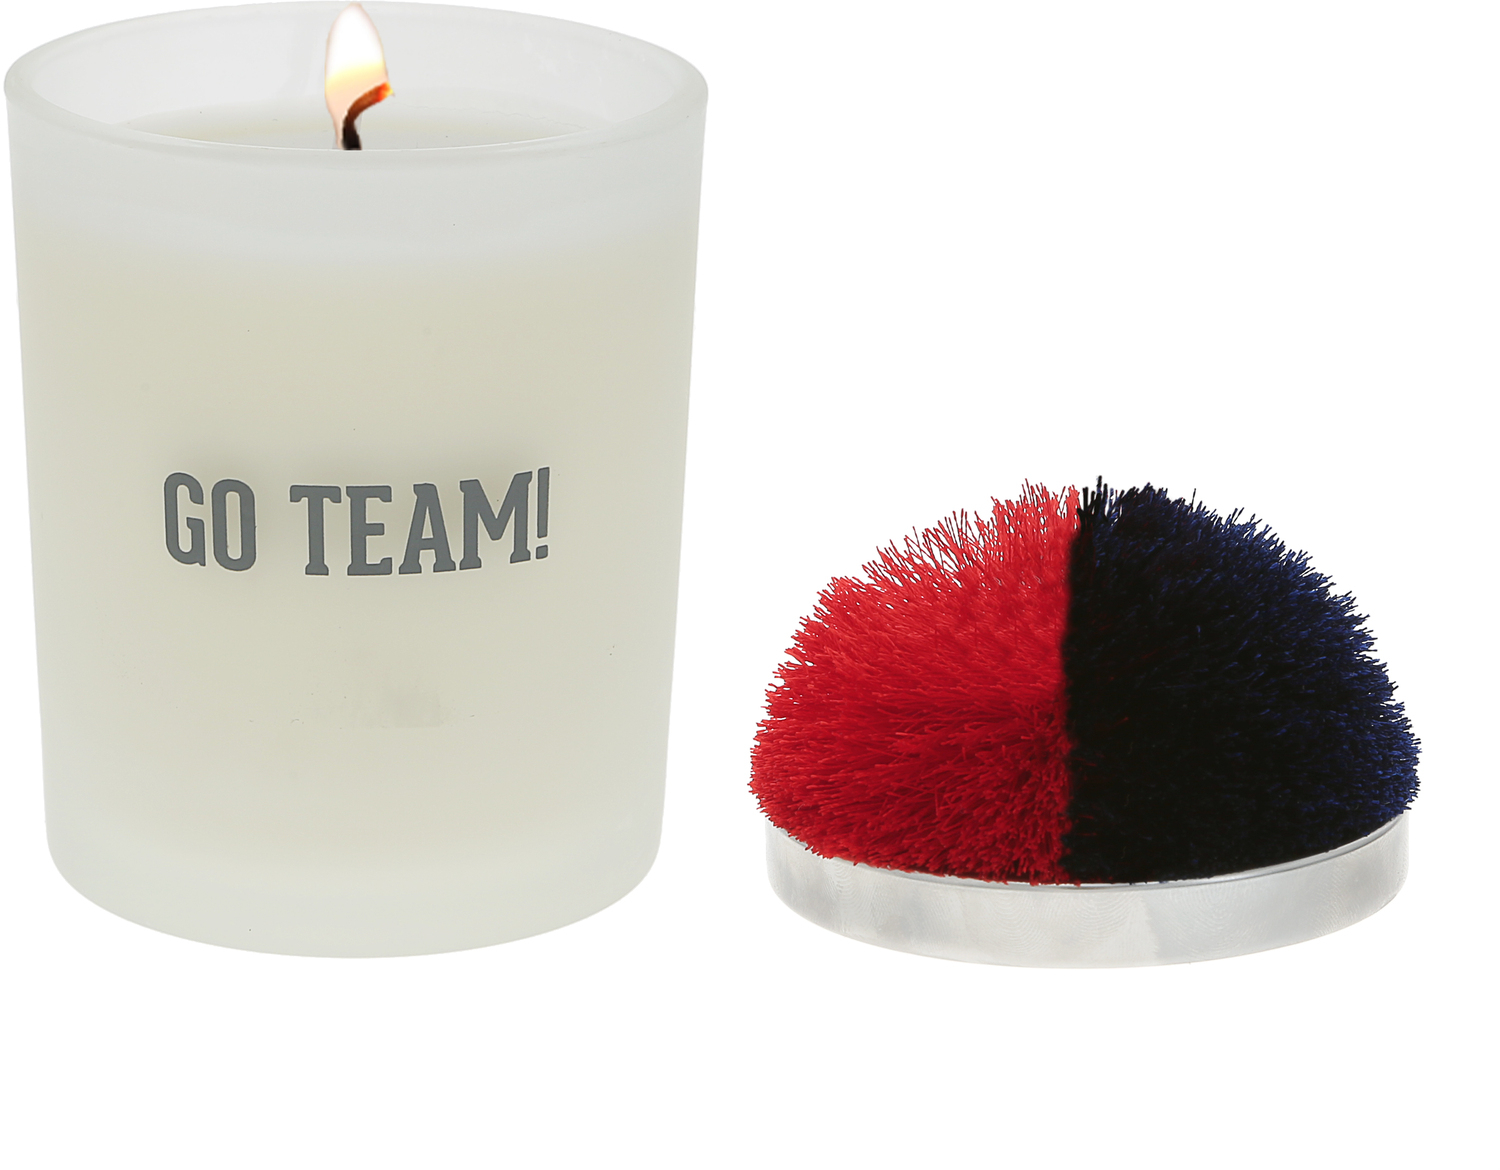 Go Team! - Red & Navy by Repre-Scent - Go Team! - Red & Navy - 5.5 oz - 100% Soy Wax Candle with Pom Pom Lid
Scent: Tranquility